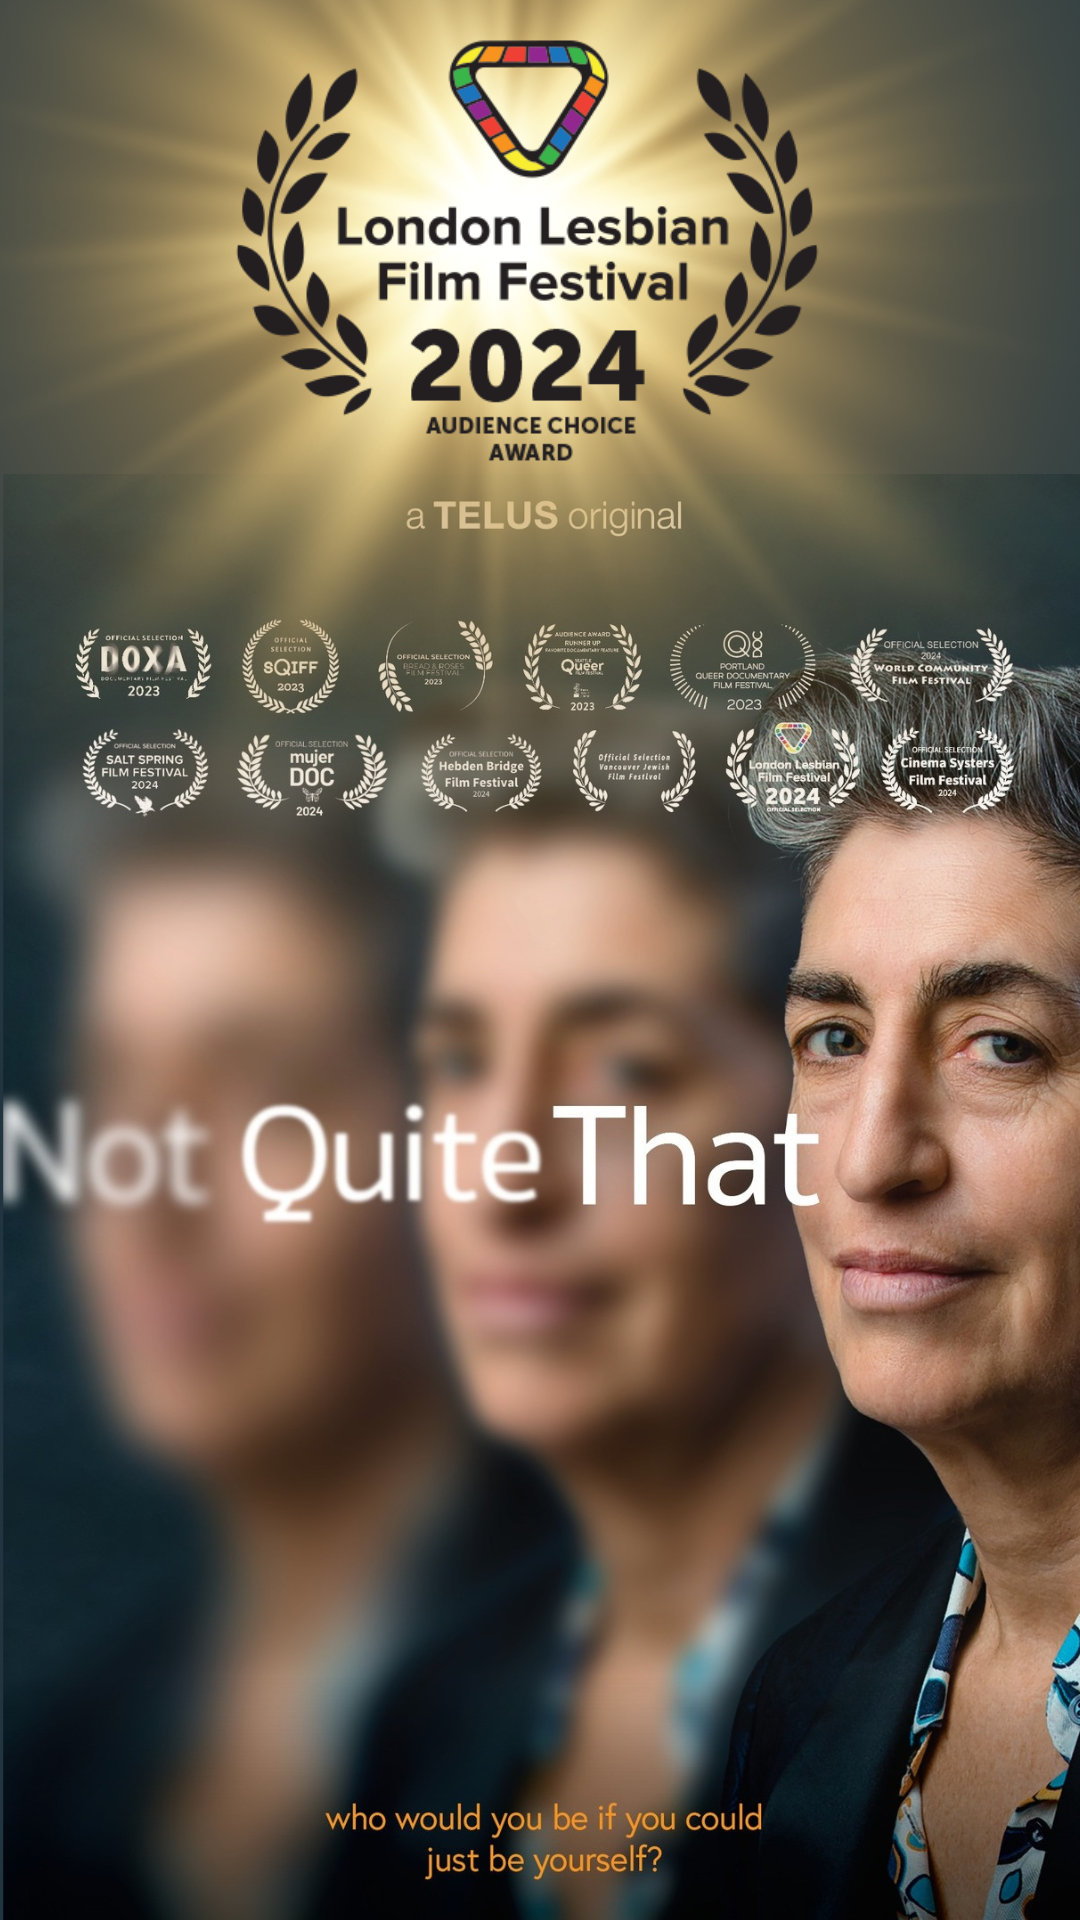 Poster image for not quite that. The sideview of a woman looking towards the image. She looks content.